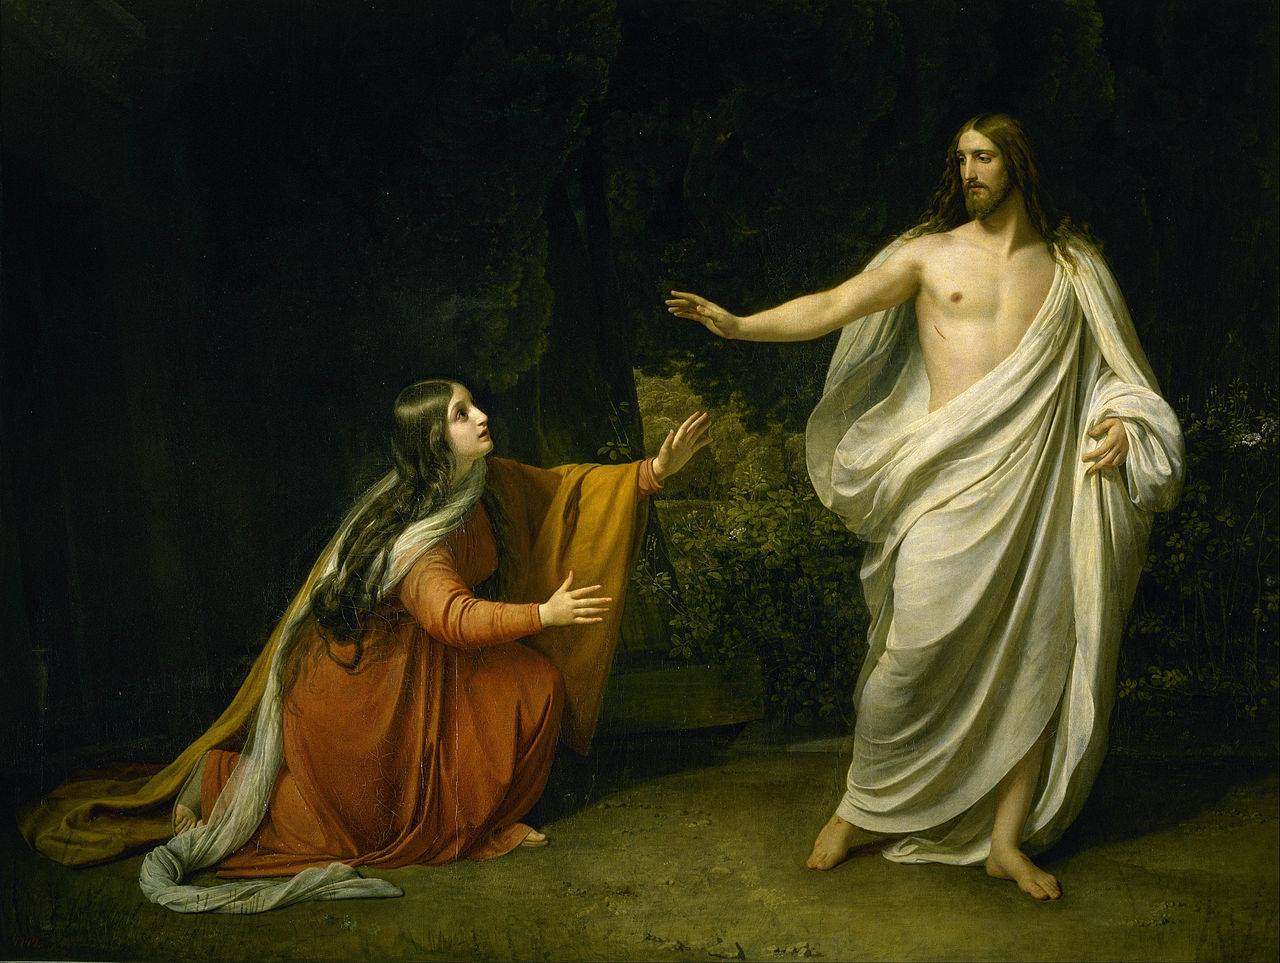 St. Mary Magdalene’s Feast Day